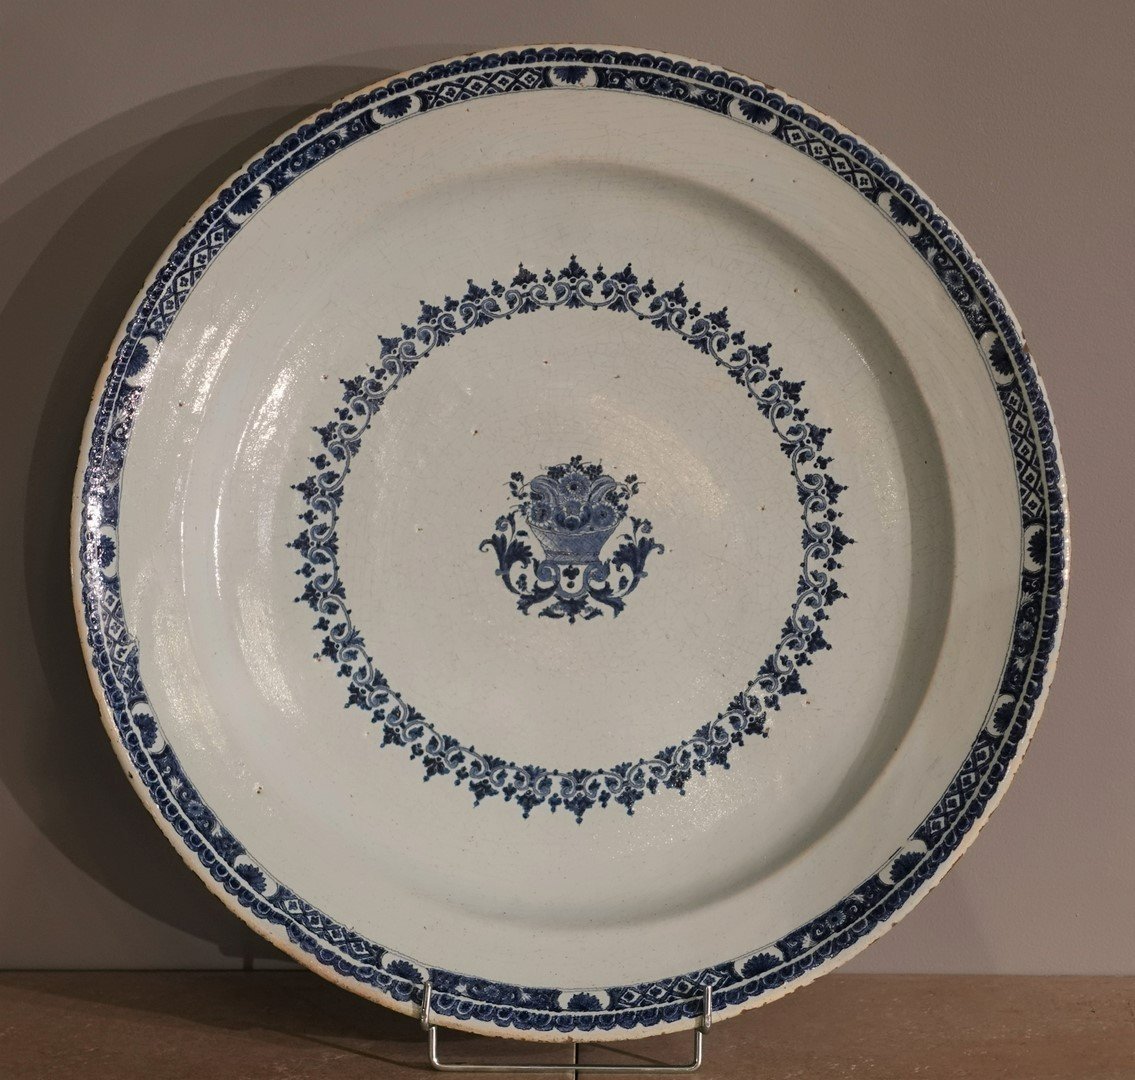 Earthenware From Rouen – Large 18th Century Ceremonial Dish